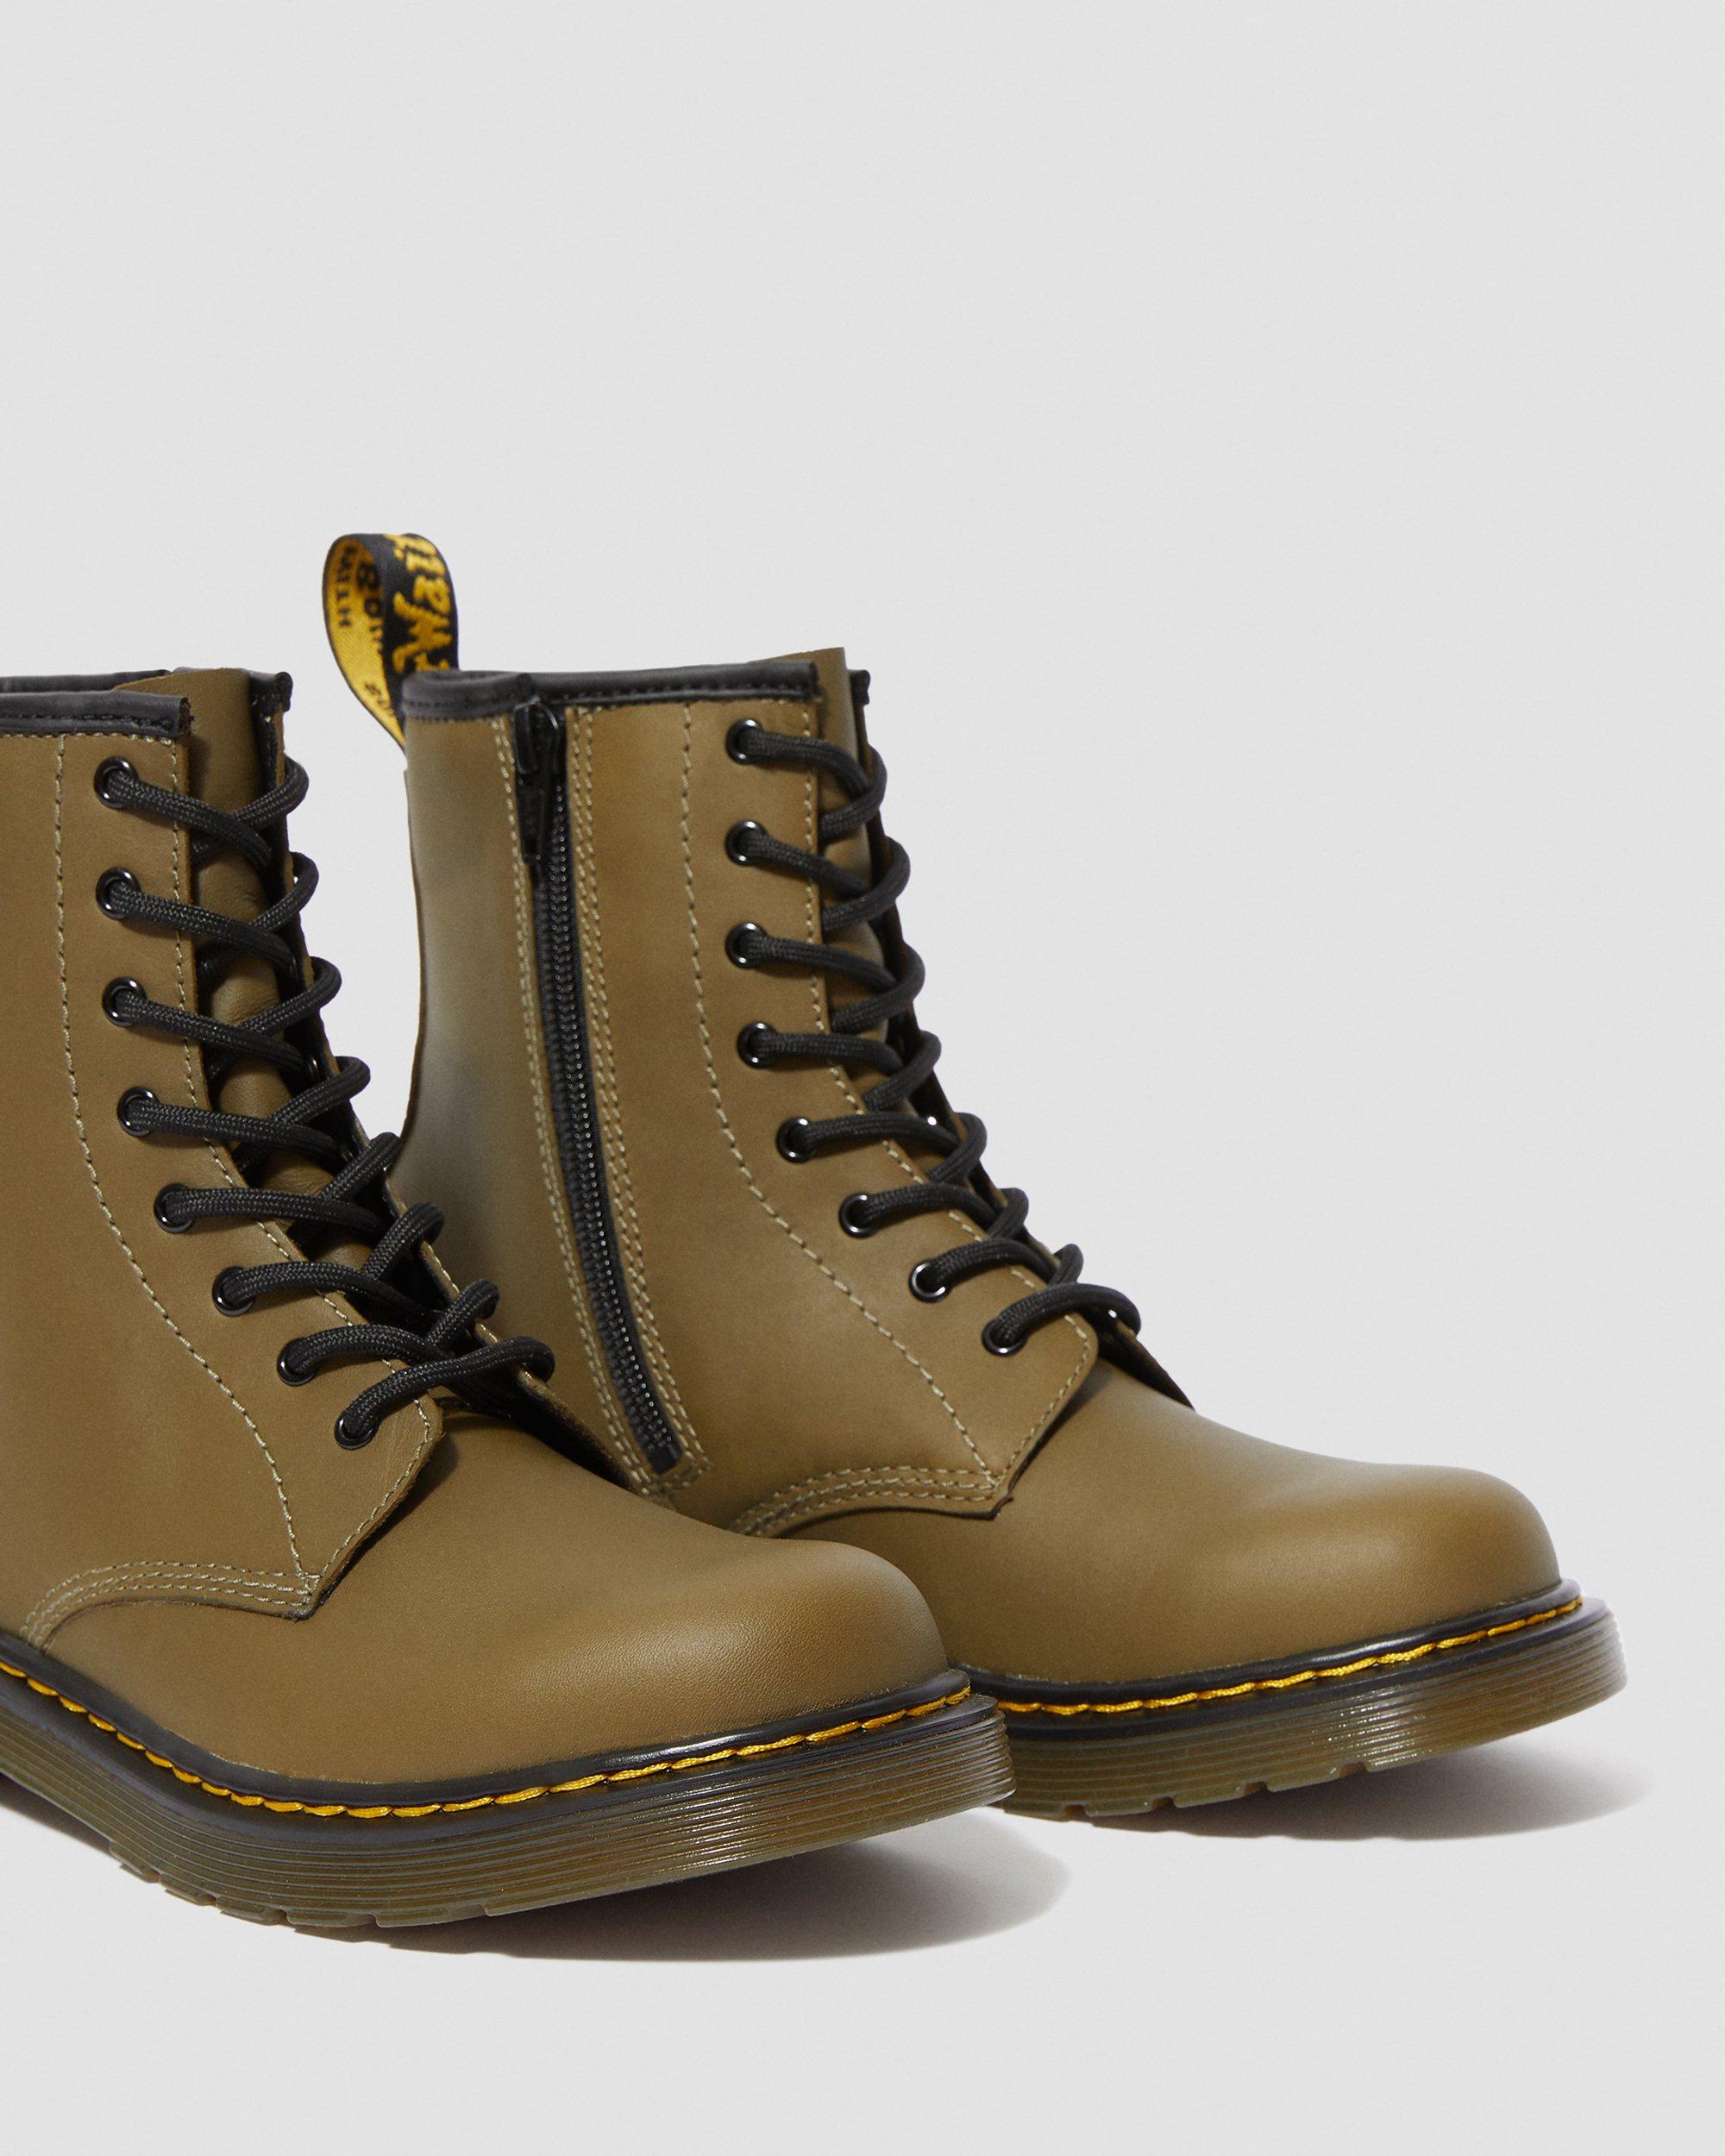 Youth 1460 Leather Lace Up Boots in Olive | Dr. Martens | Schnürboots